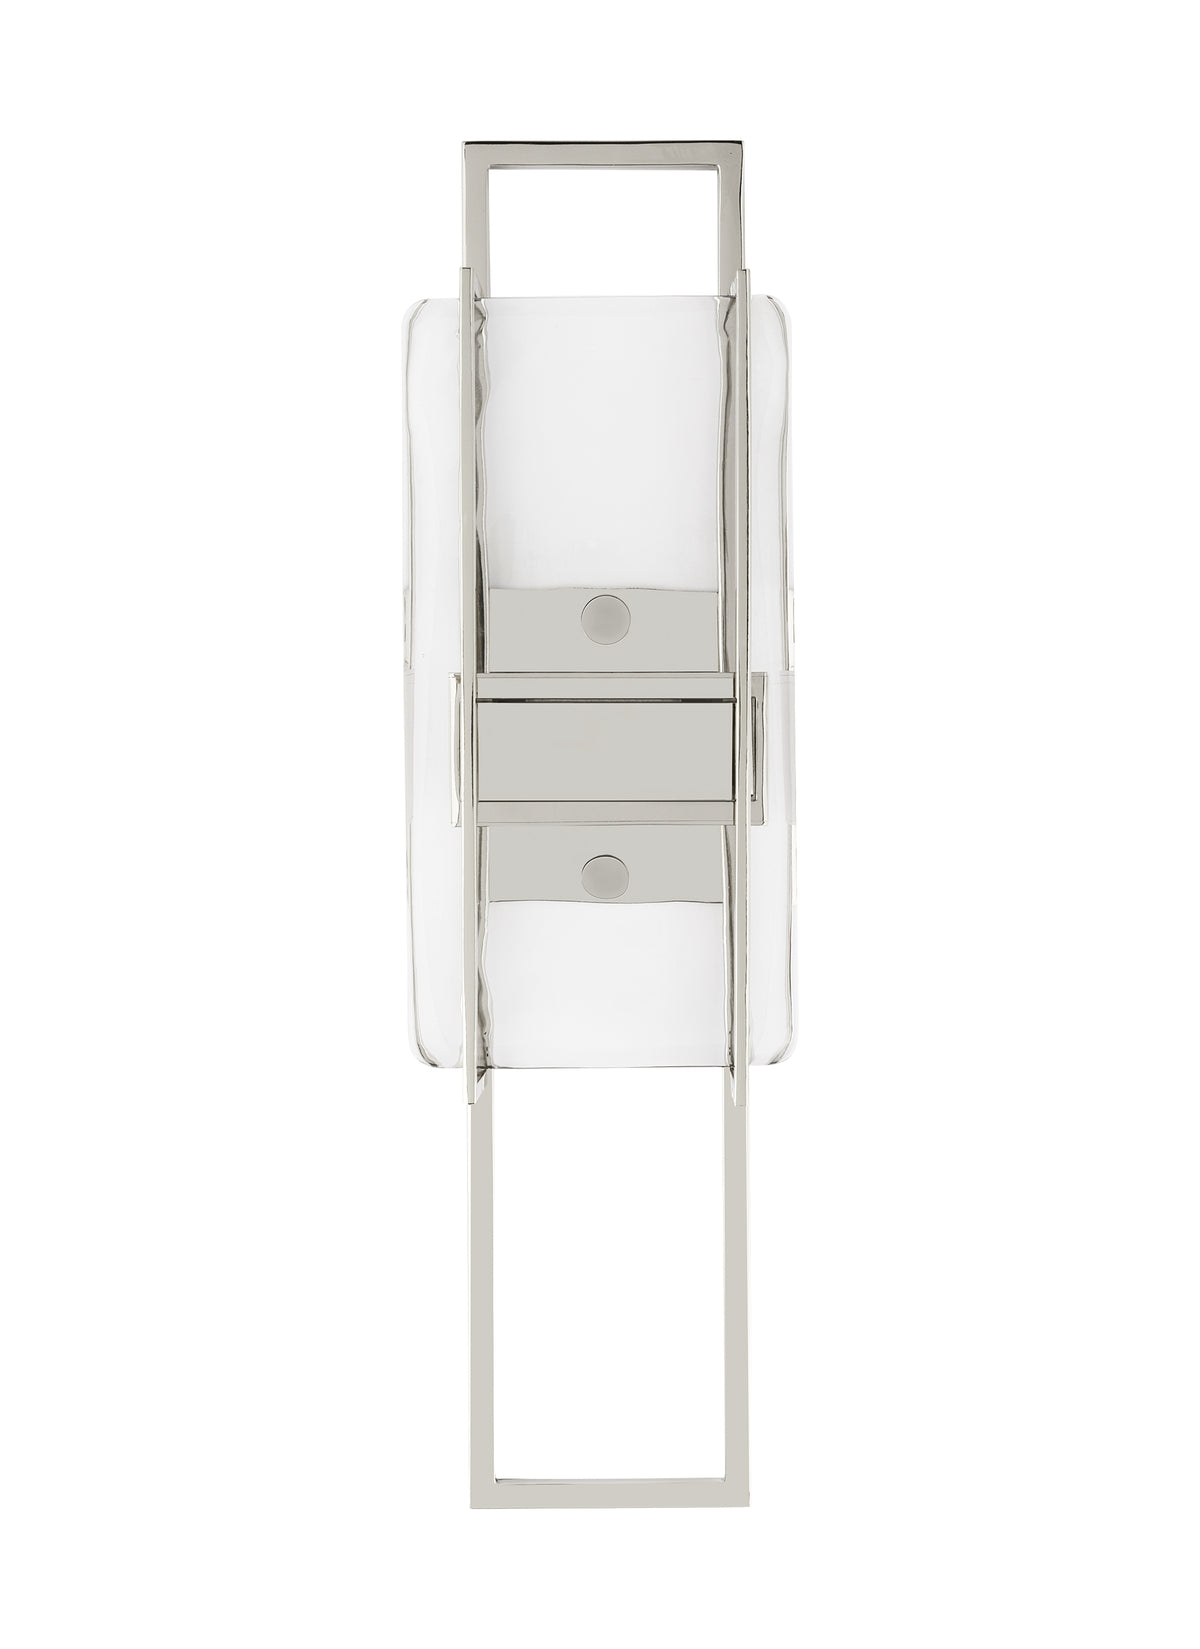 Tech Lighting, Duelle Wall Sconce, Polished Nickel 